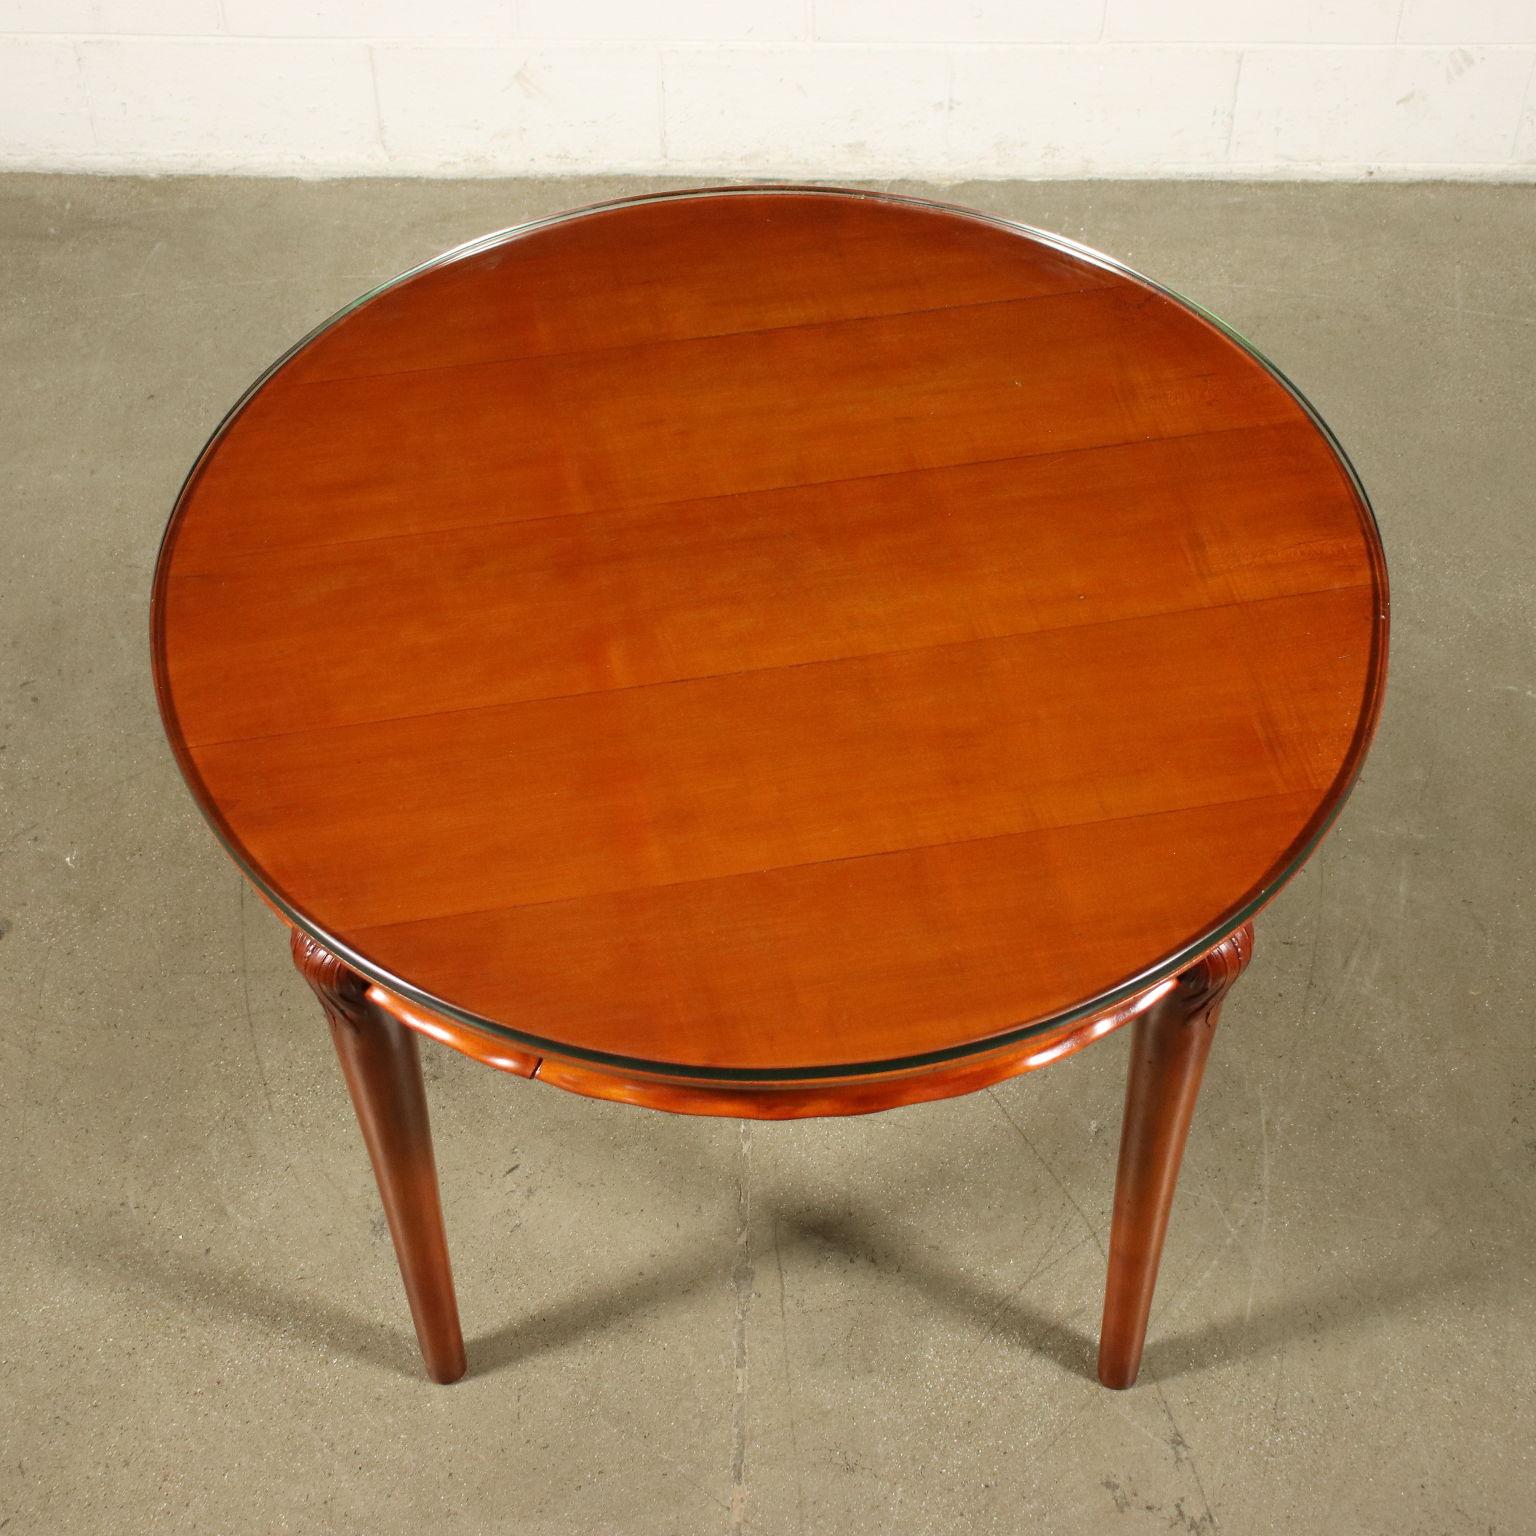 Table Solid Beech Mahogany Veneer Glass Italy 1950s For Sale 2